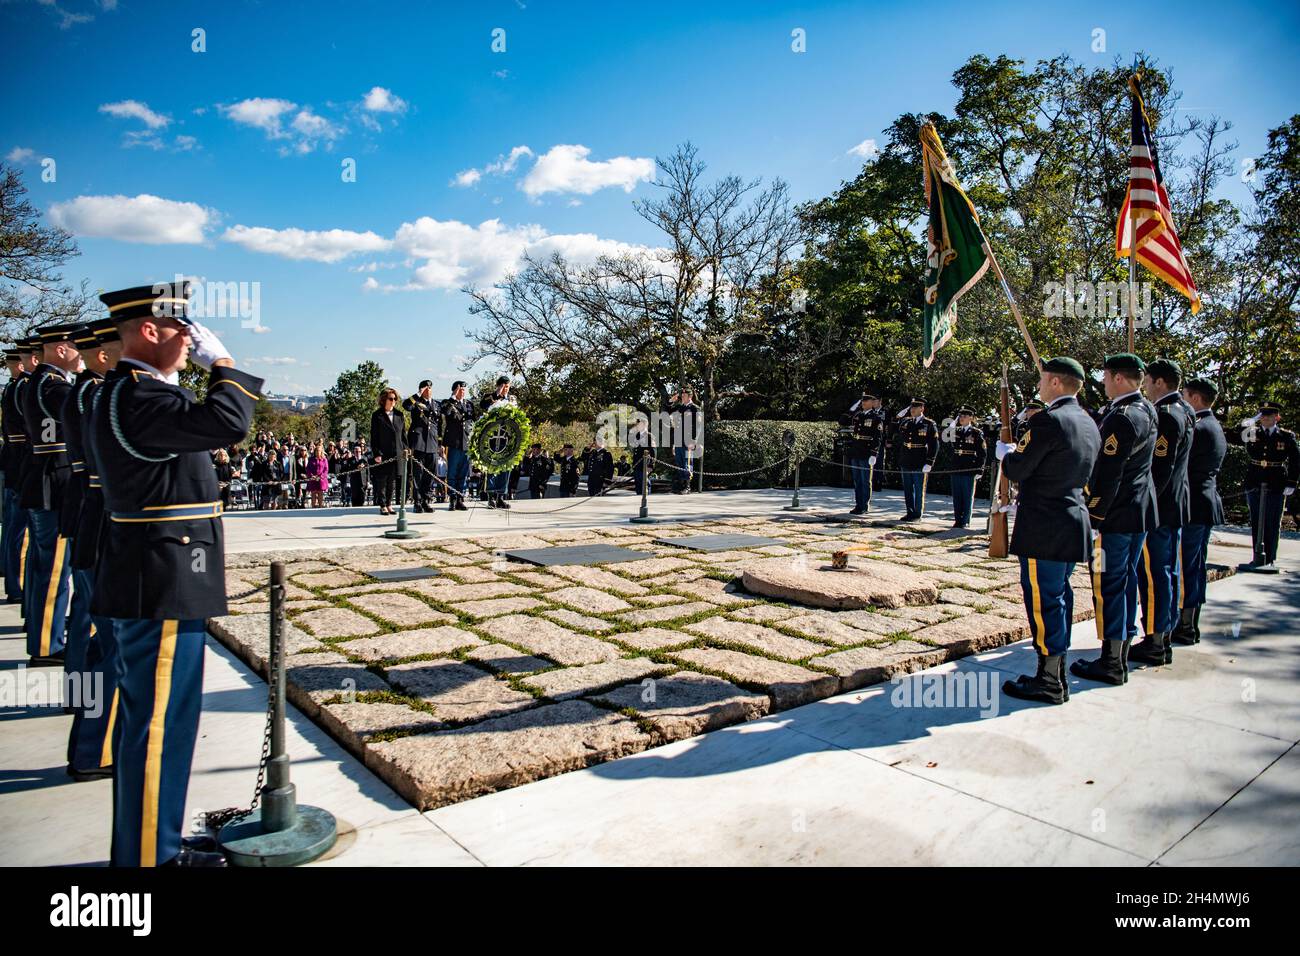 Arlington, United States of America. 03 November, 2021. Kathleen Kennedy Townsend, Army Maj. Gen. Richard Angle, Army Command Sgt. Maj. Ted Munter, and Army Chief Warrant Officer Scott Gronowski, with the 1st Special Forces Airborne Command, known as the Green Berets, hold a wreath-laying ceremony at the gravesite of President John F. Kennedy at Arlington National Cemetery November 3, 2021 in Arlington, Virginia. The ceremony commemorates Kennedy's contributions to the U.S. Army Special Forces. Credit: Elizabeth Fraser/U.S. Army/Alamy Live News Stock Photo